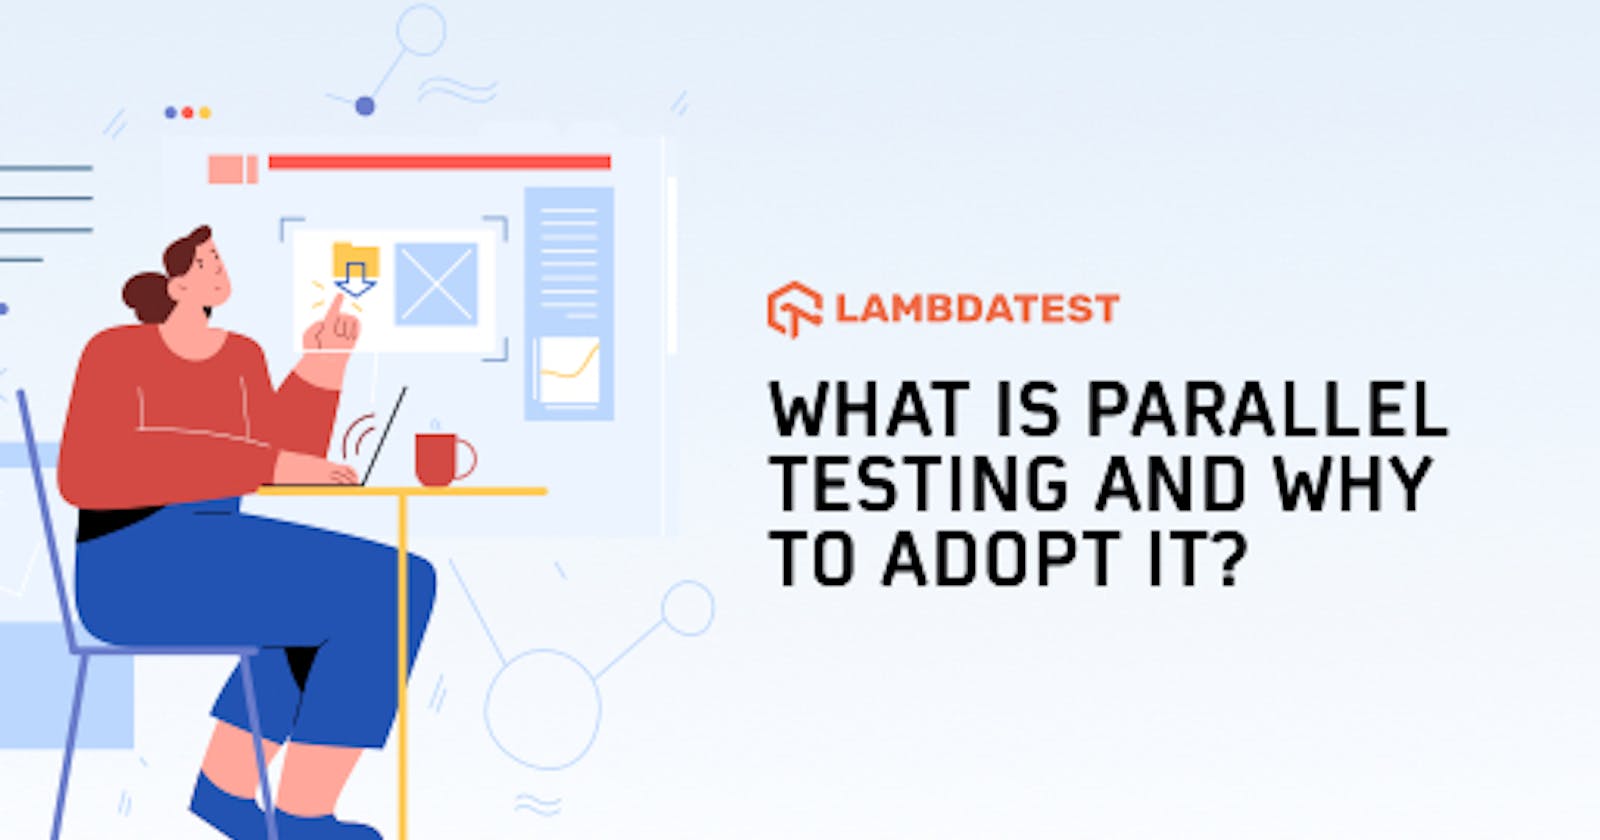 What Is Parallel Testing And Why To Adopt It?